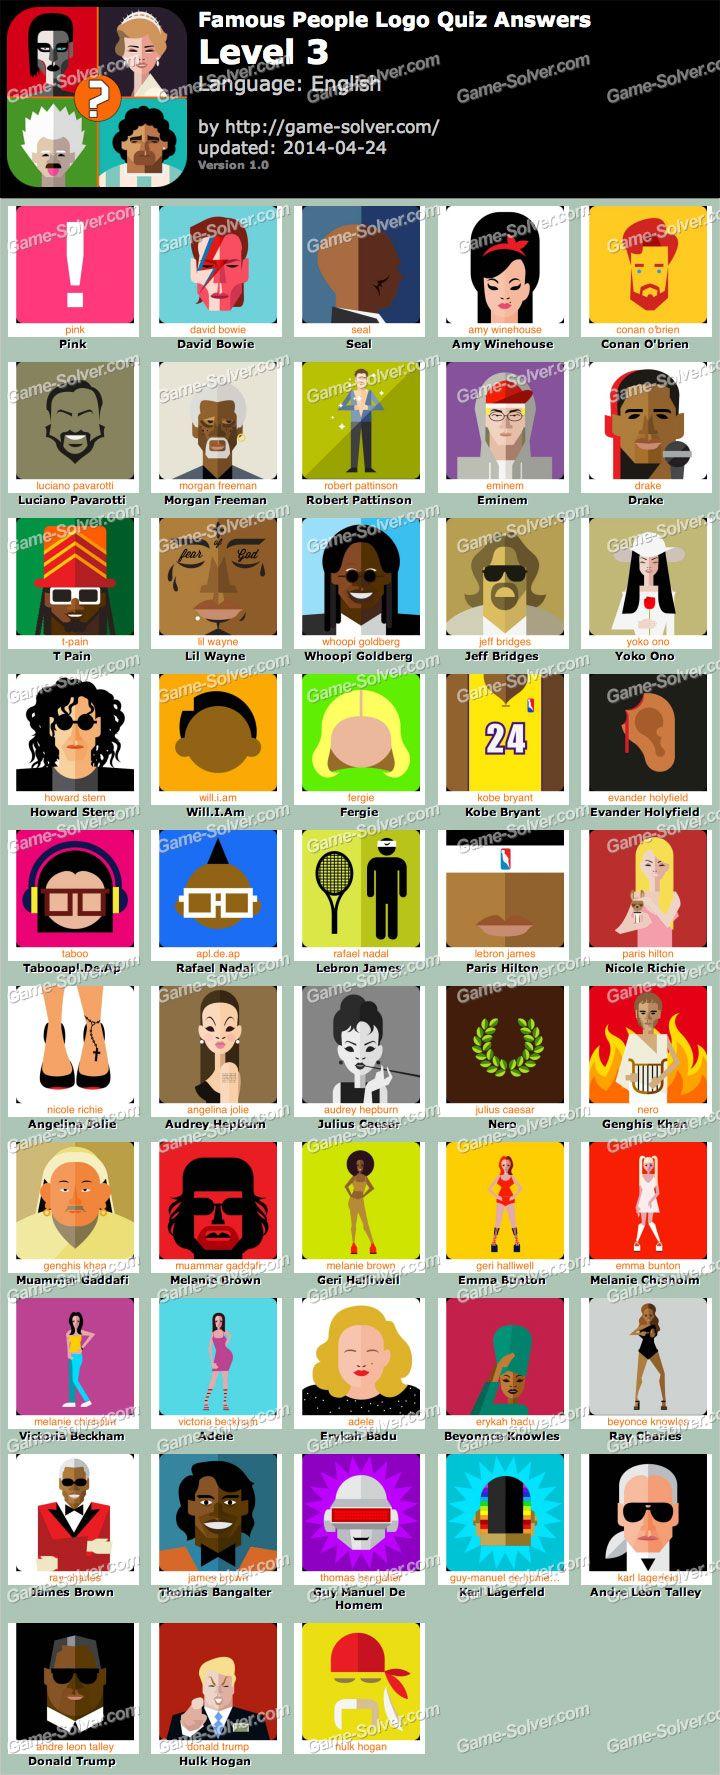 Famous People Logo - Famous People Logo Quiz Level 3 - Game Solver